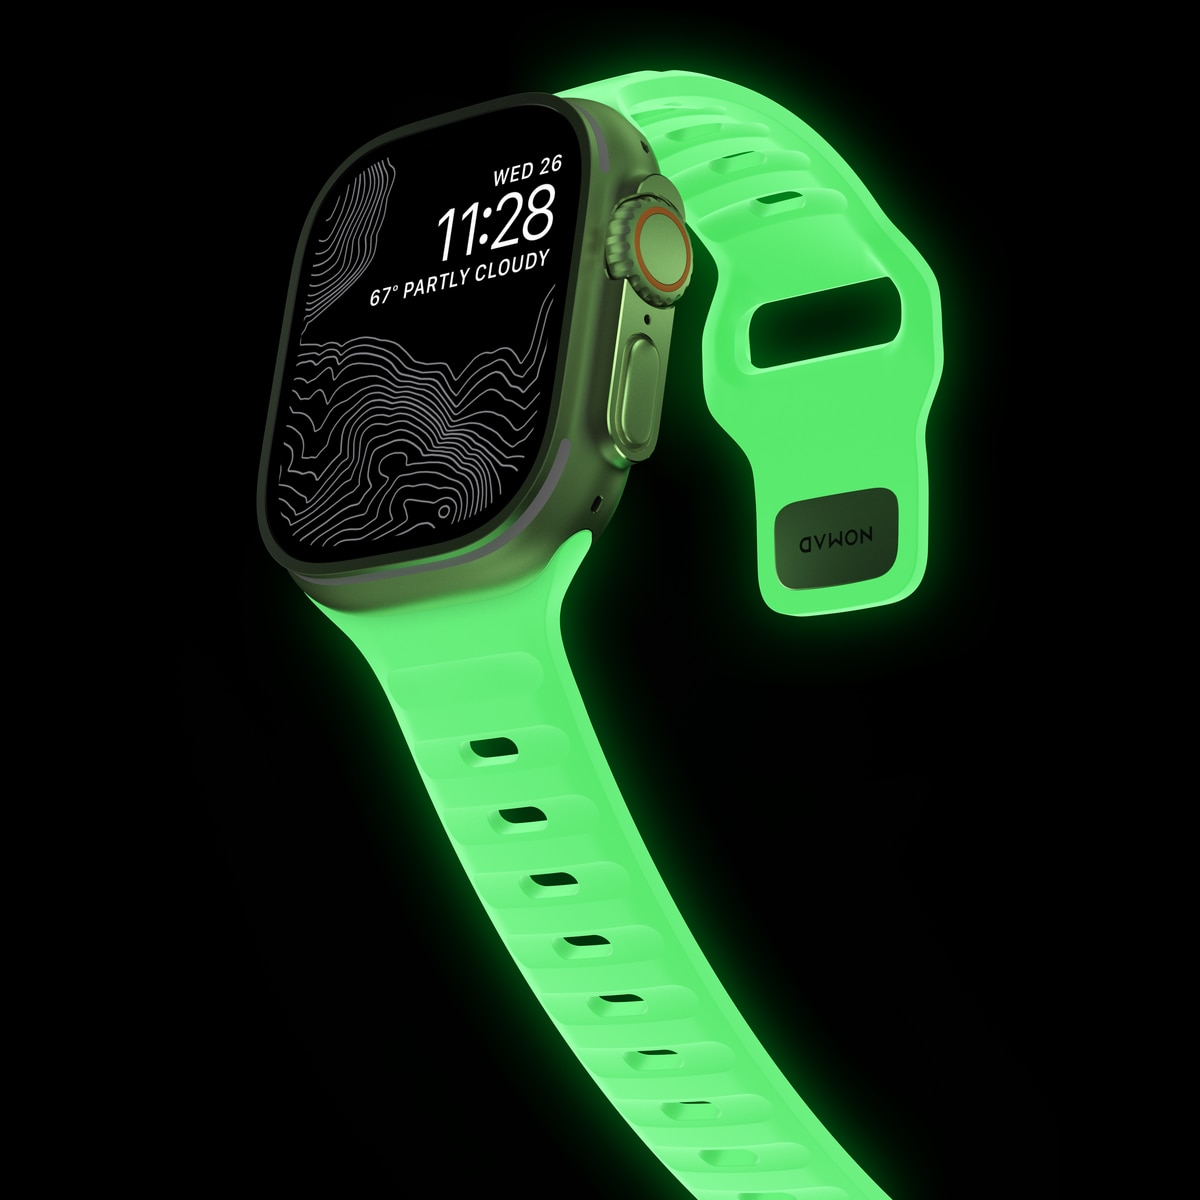 Apple Watch 44mm Sport Band Glow 2.0 - Limited edition